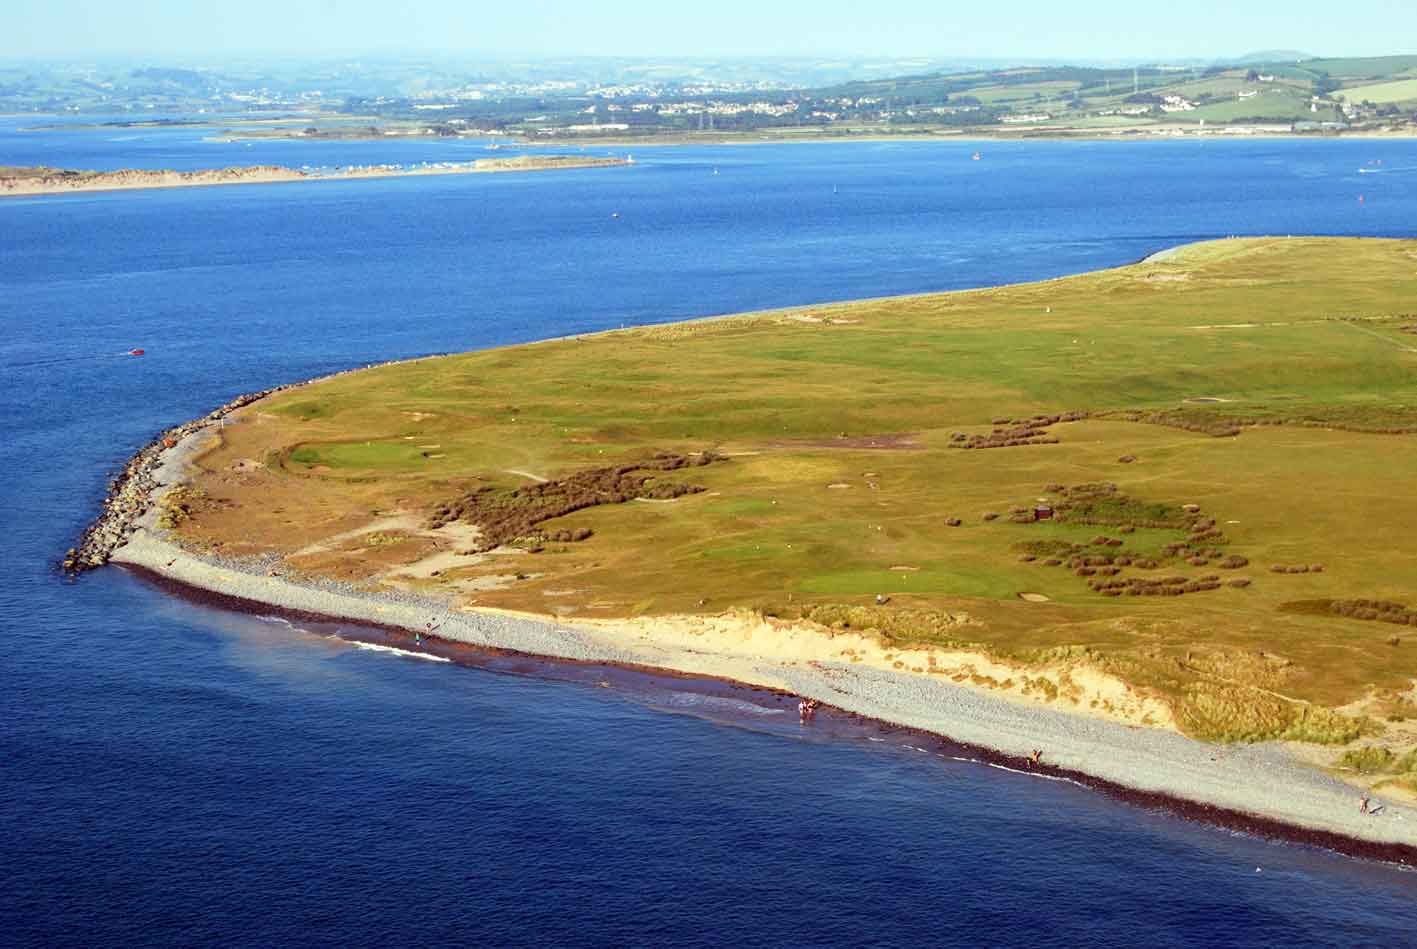 Image of Northam Burrows from the air